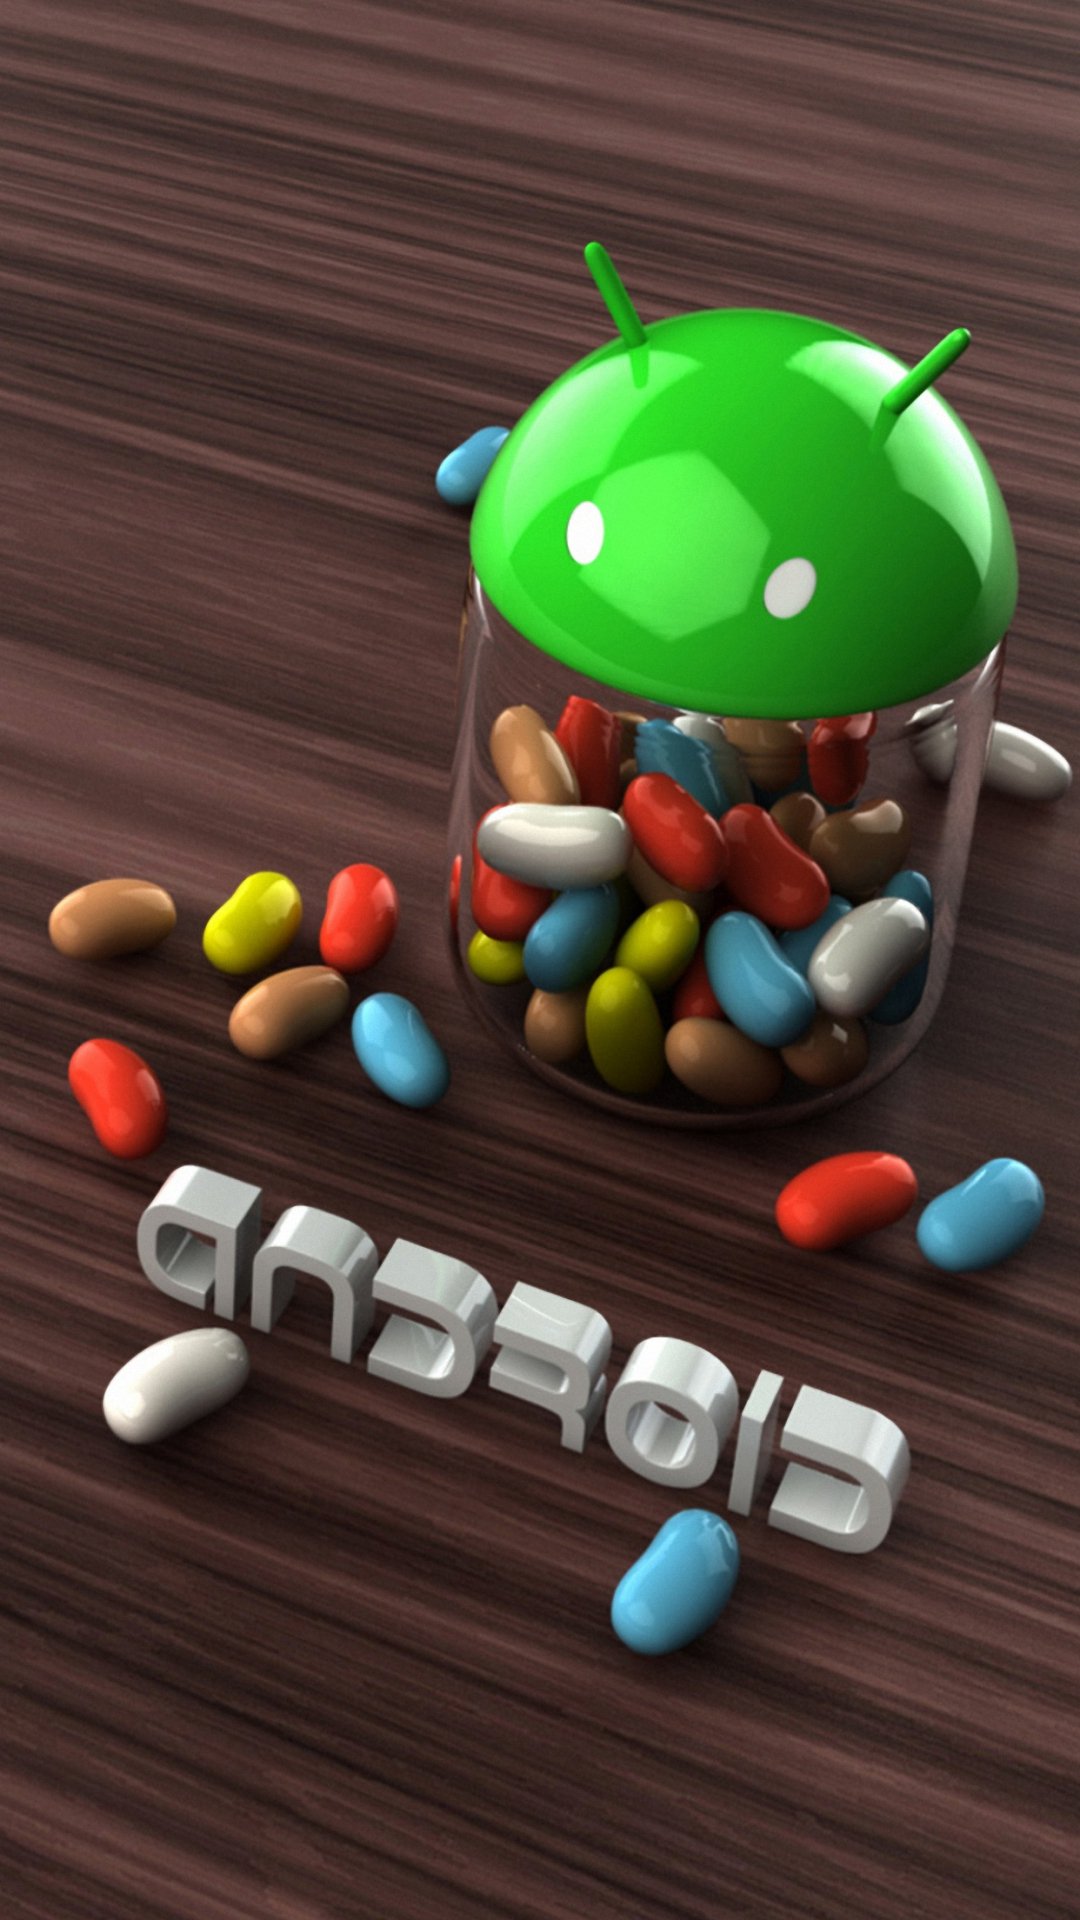 melhores wallpapers para android,jelly bean,pharmaceutical drug,sweetness,food,confectionery